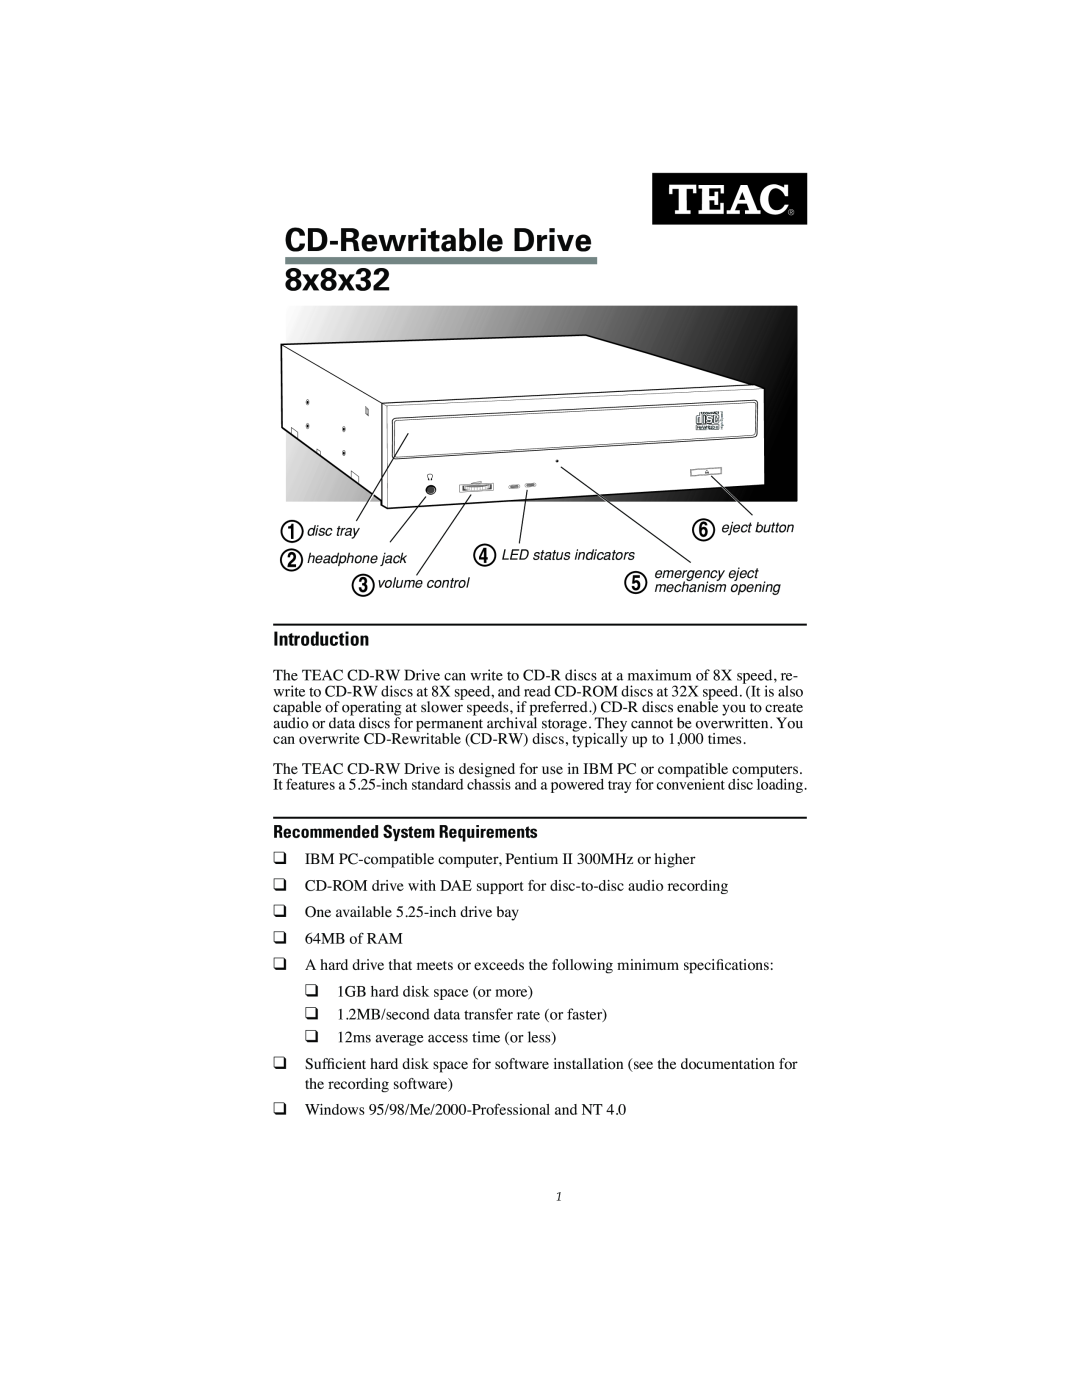 Teac CD-W58 E specifications Introduction, Recommended System Requirements, CD-RewritableDrive 